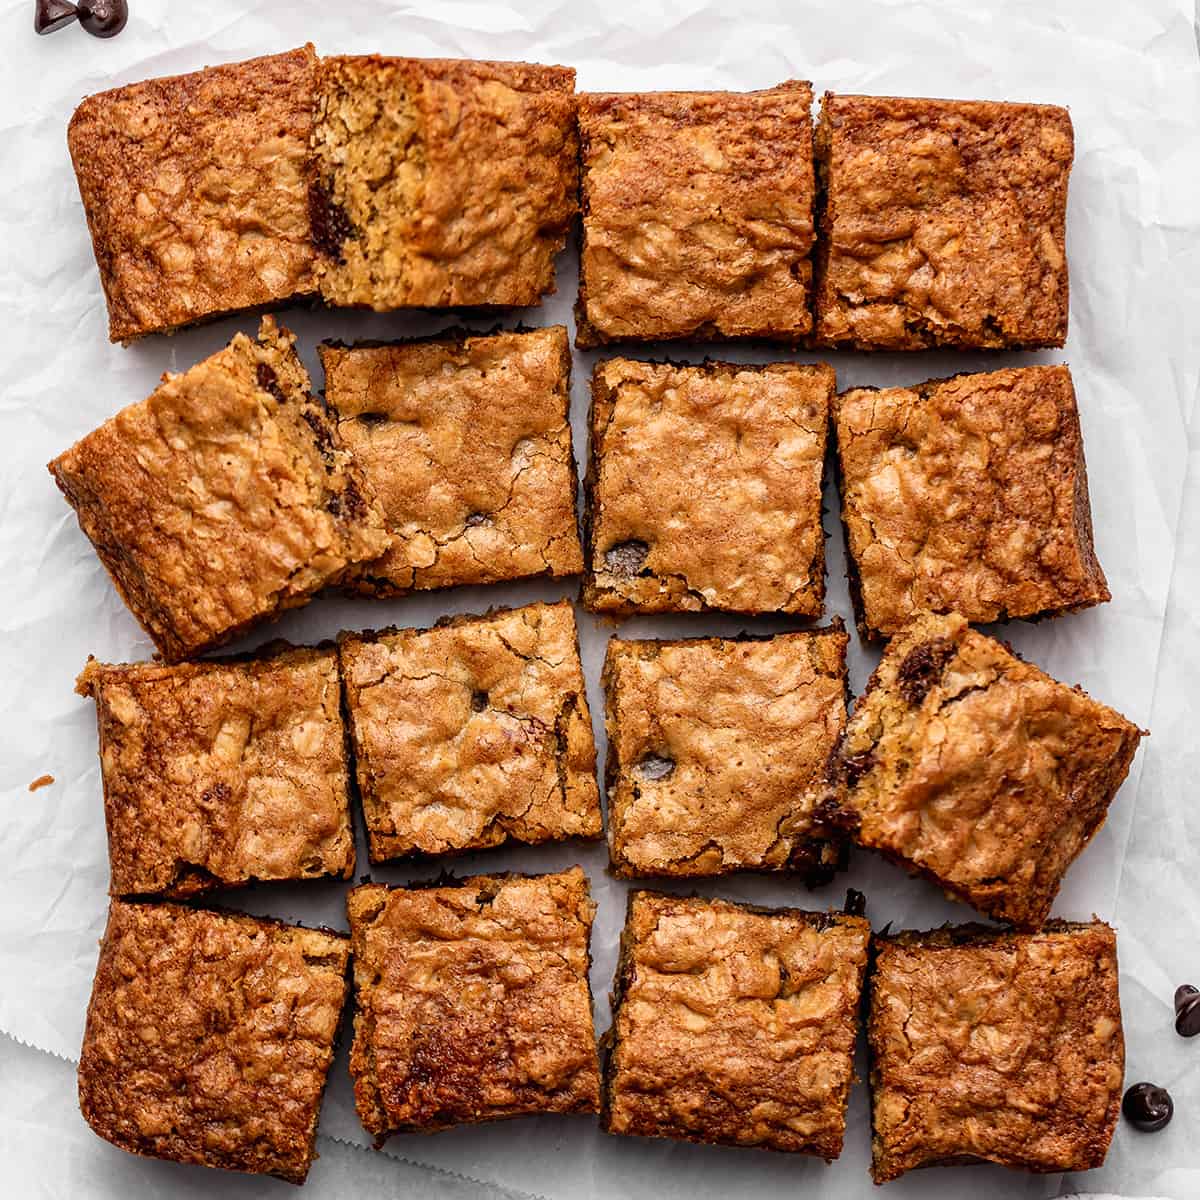 16 Chocolate Chip Oatmeal Cookie Bars cut into squares